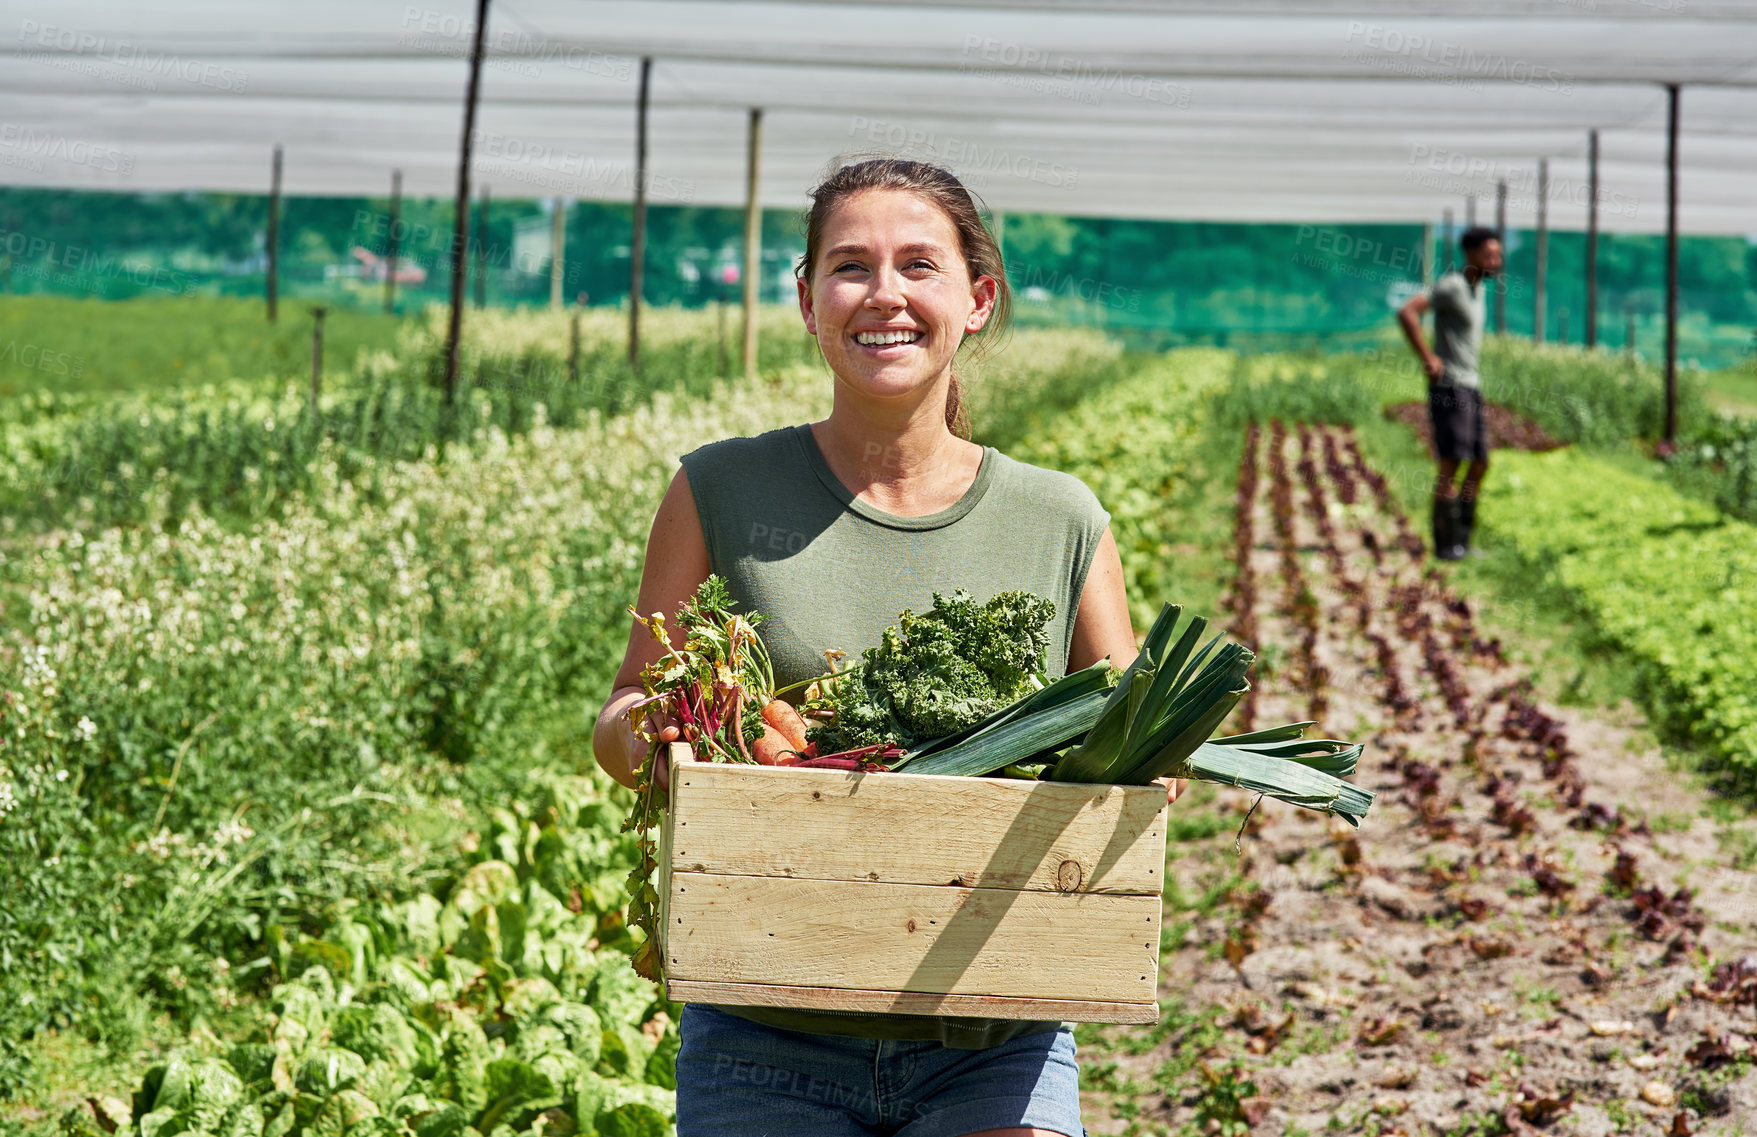 Buy stock photo Portrait of an attractive young woman carrying a crate full of vegetables outdoors on a farm